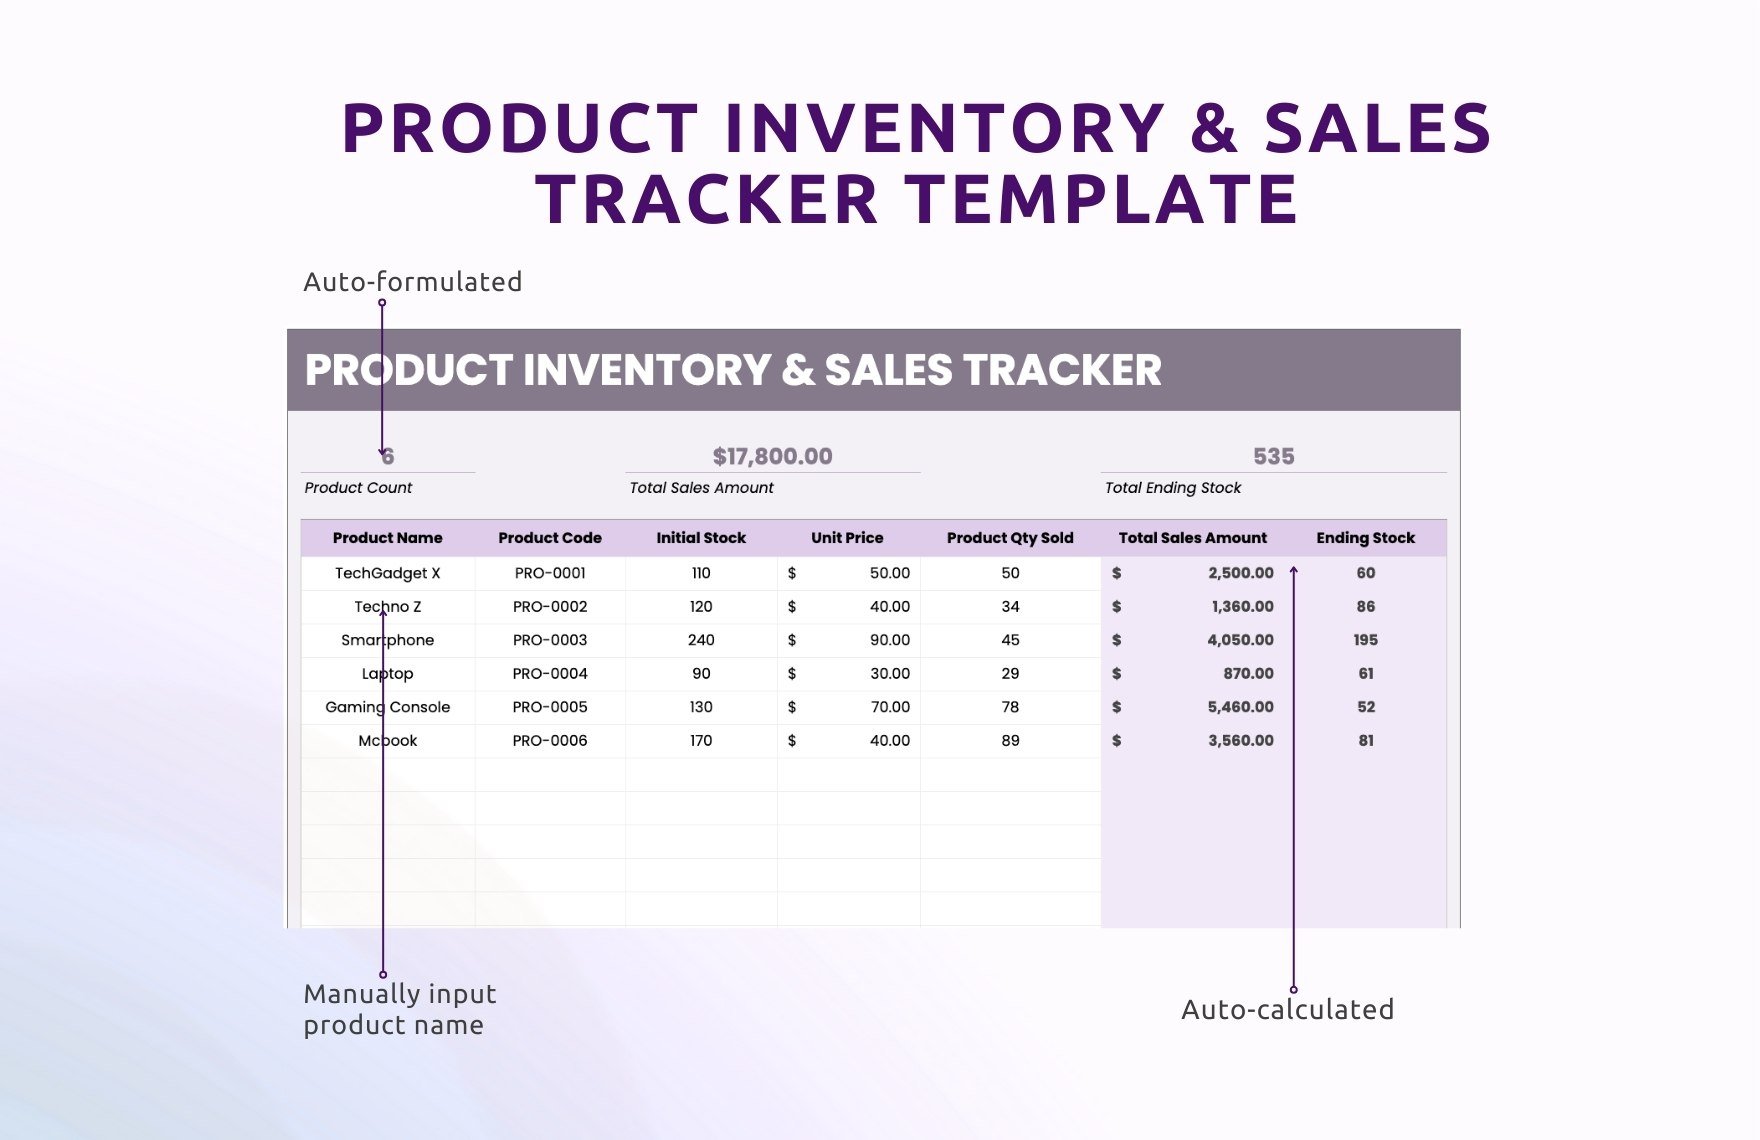 Product Inventory & Sales Tracker Template